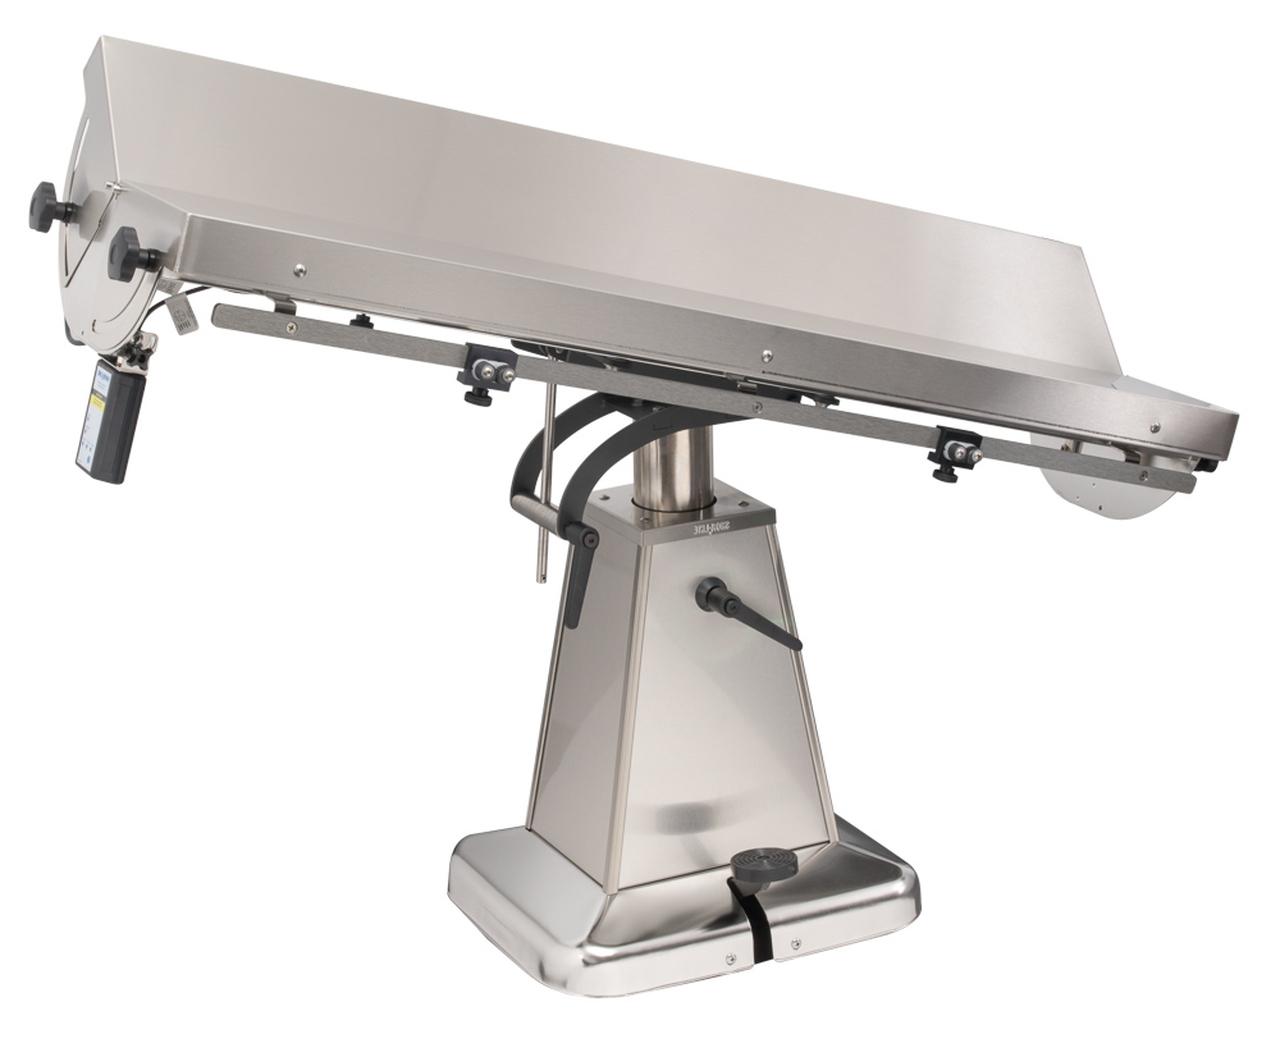 Surgery Table - Adjustable stainless steel table used for surgical procedures